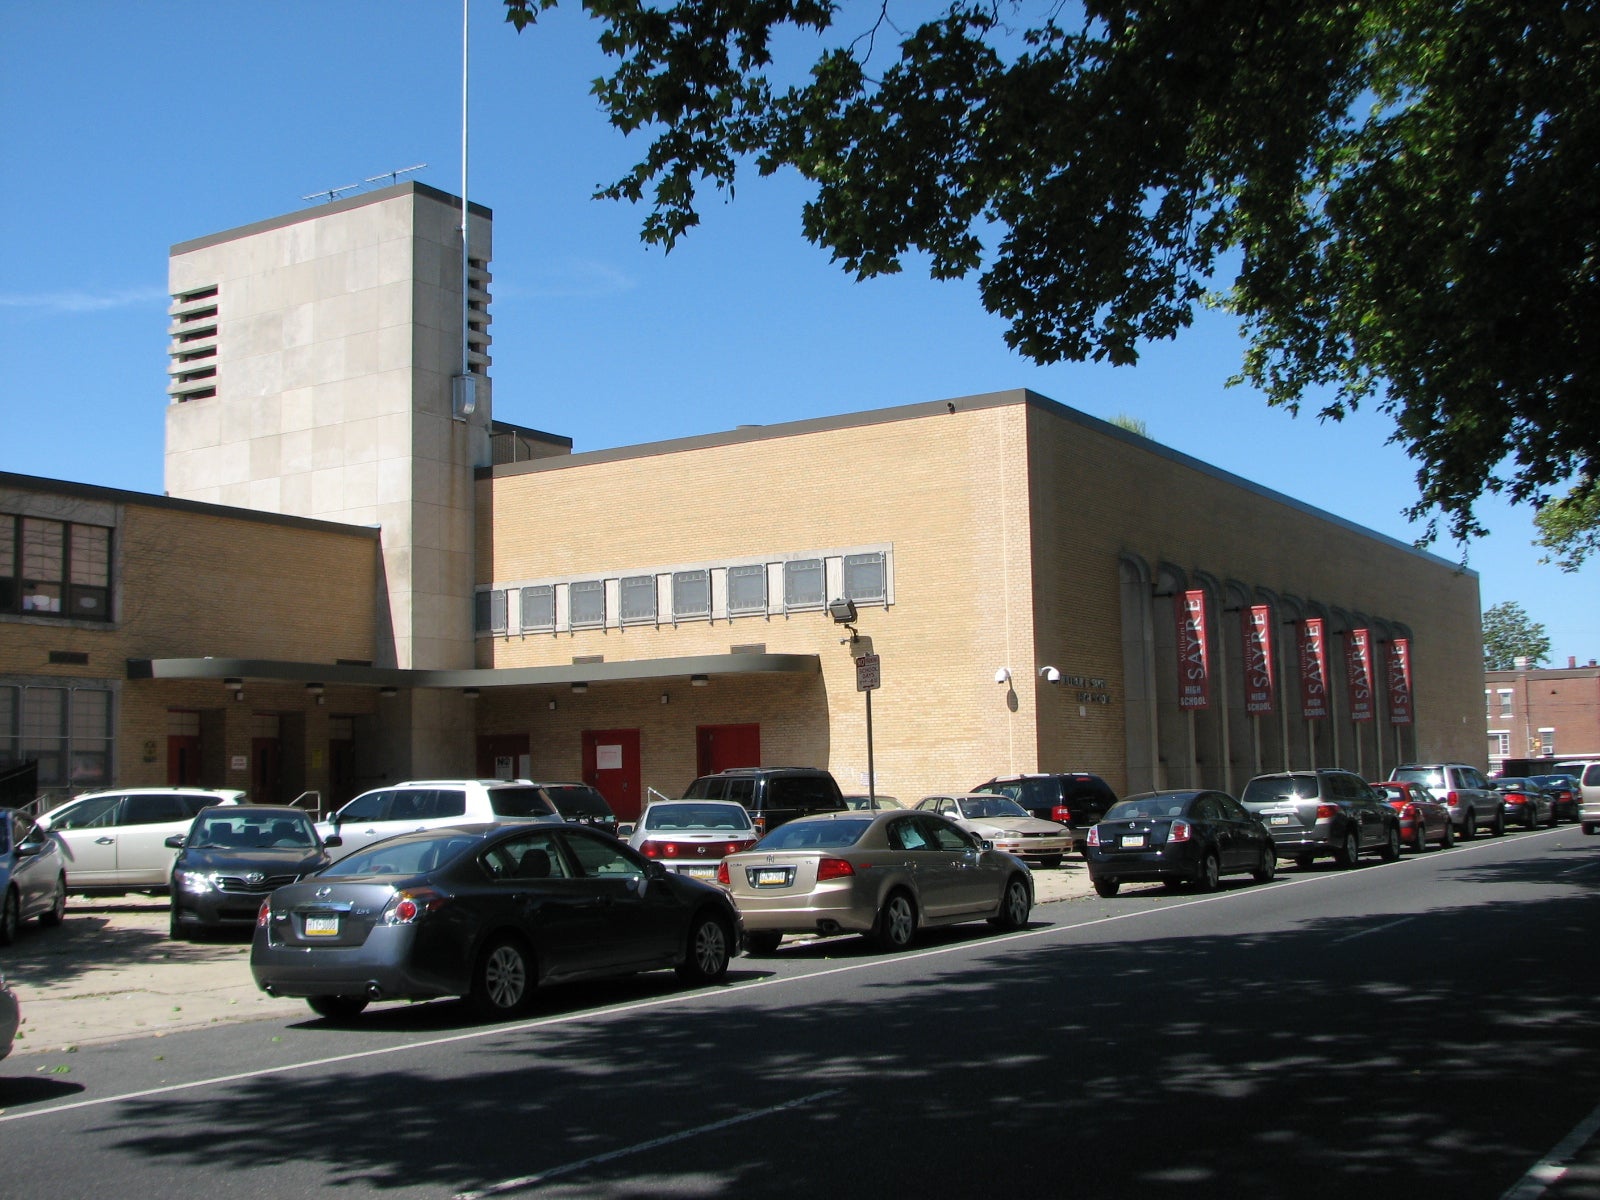 Sayre High School is a strong example of the Machine Age architecture of the 1940s.